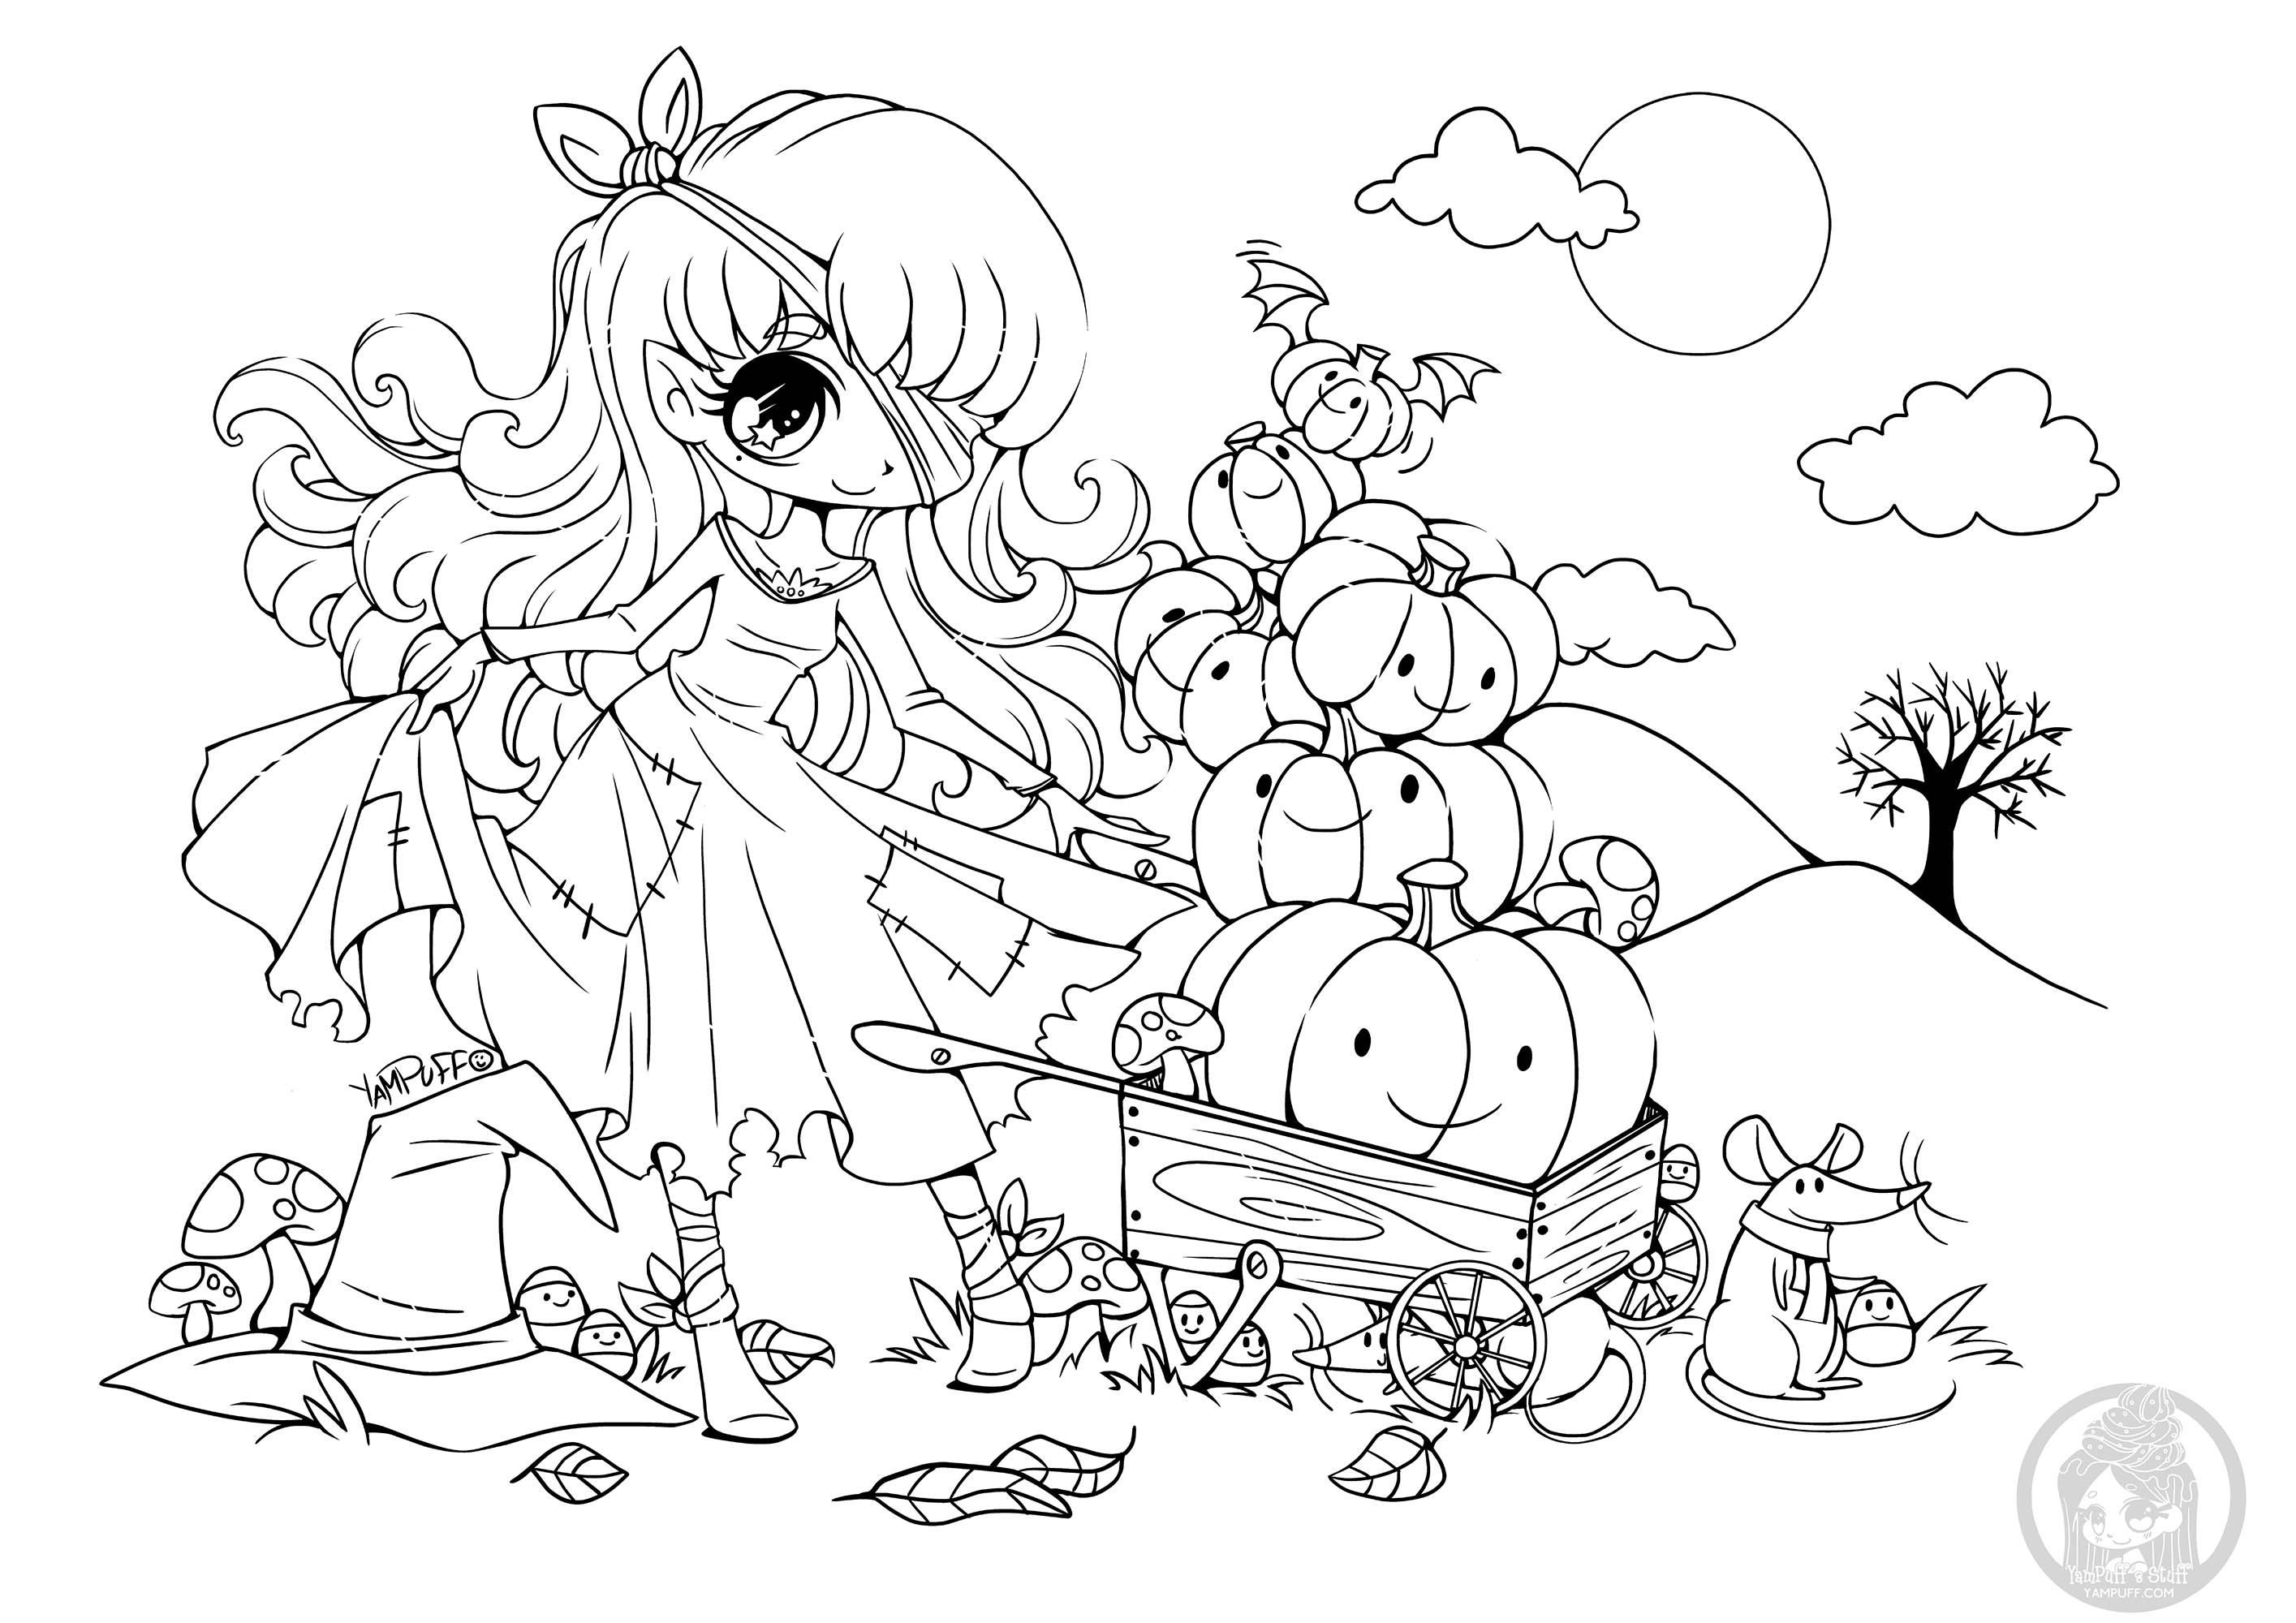 Kawaii to download for free - Kawaii Kids Coloring Pages